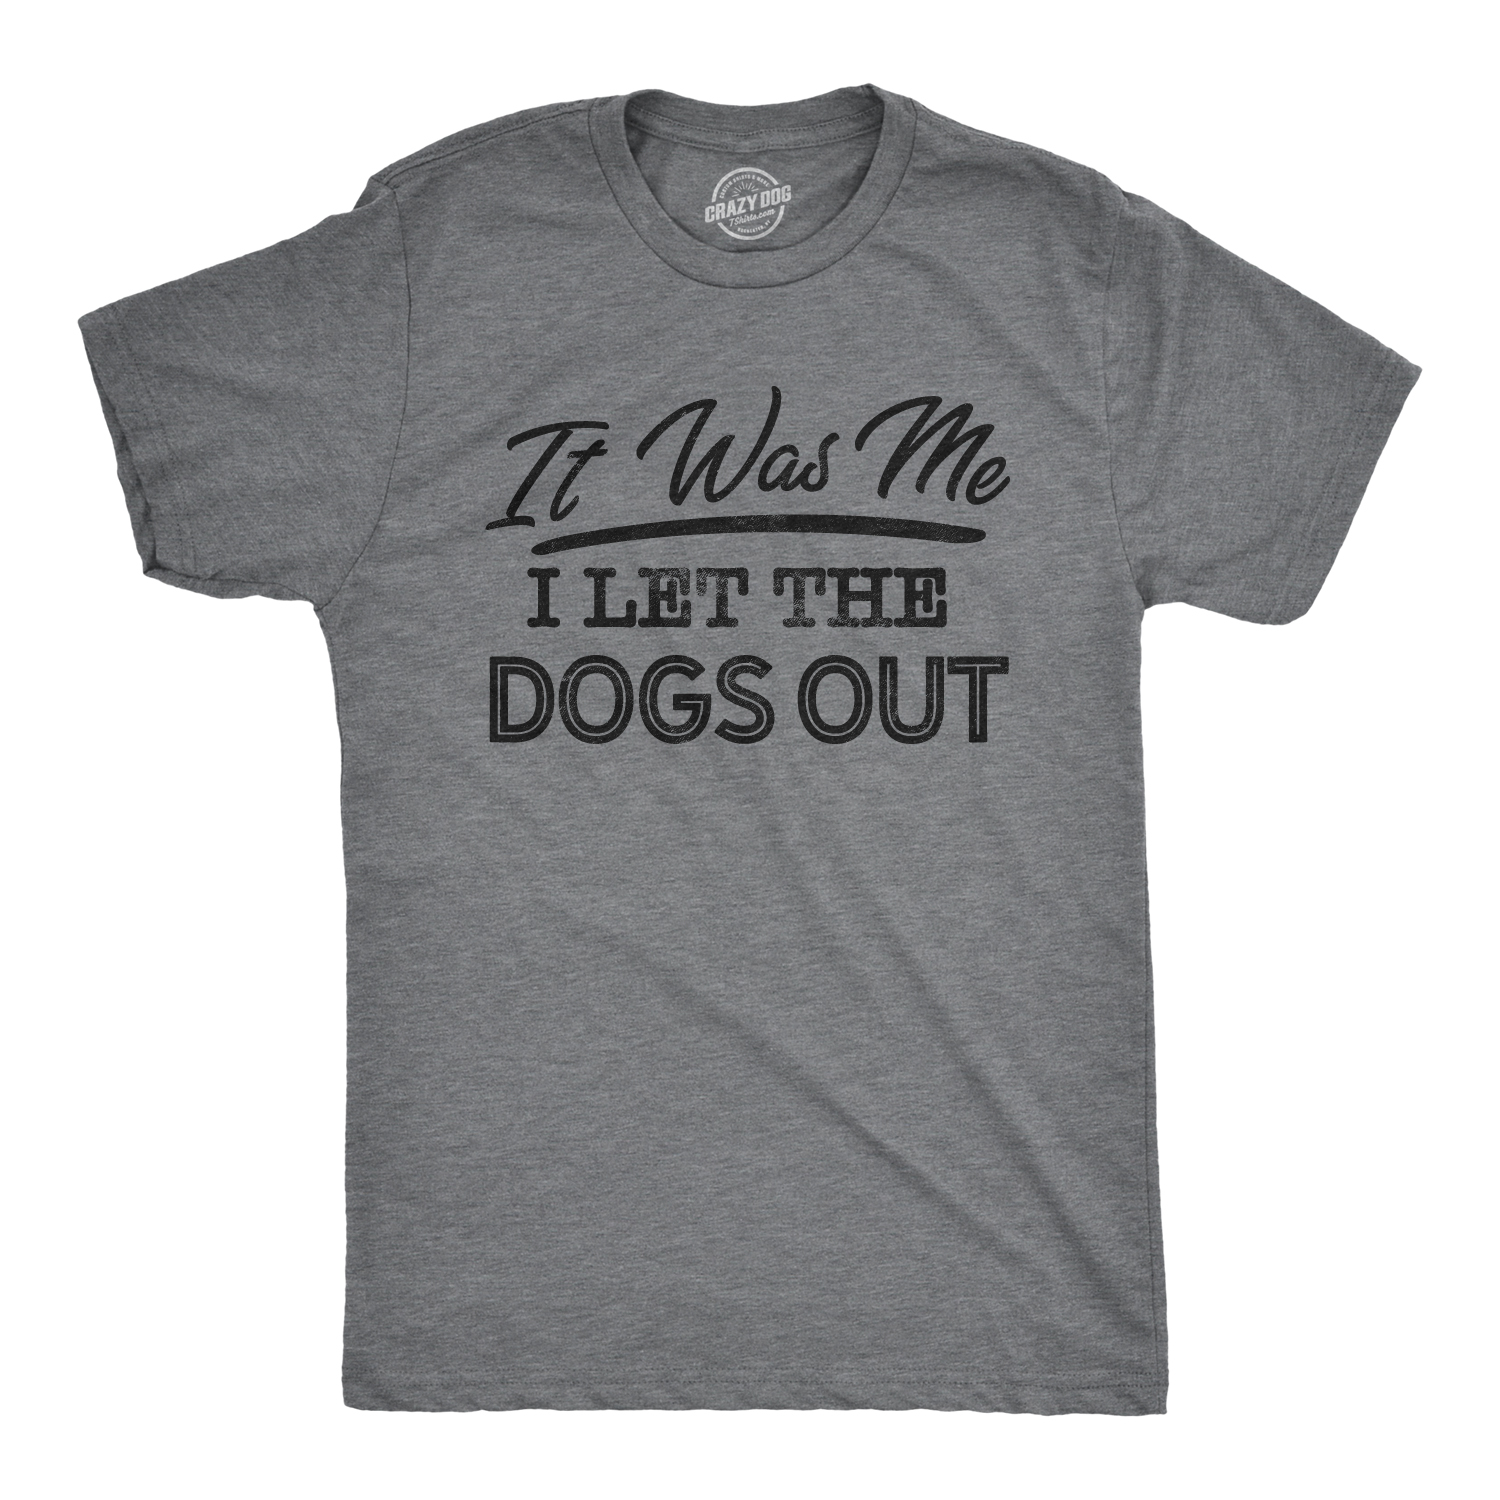 Crazy Dog Tshirts Mens It Was Me I Let The Dogs Out Tshirt Funny Song Lyrics Who Let The Dogs Out Tee